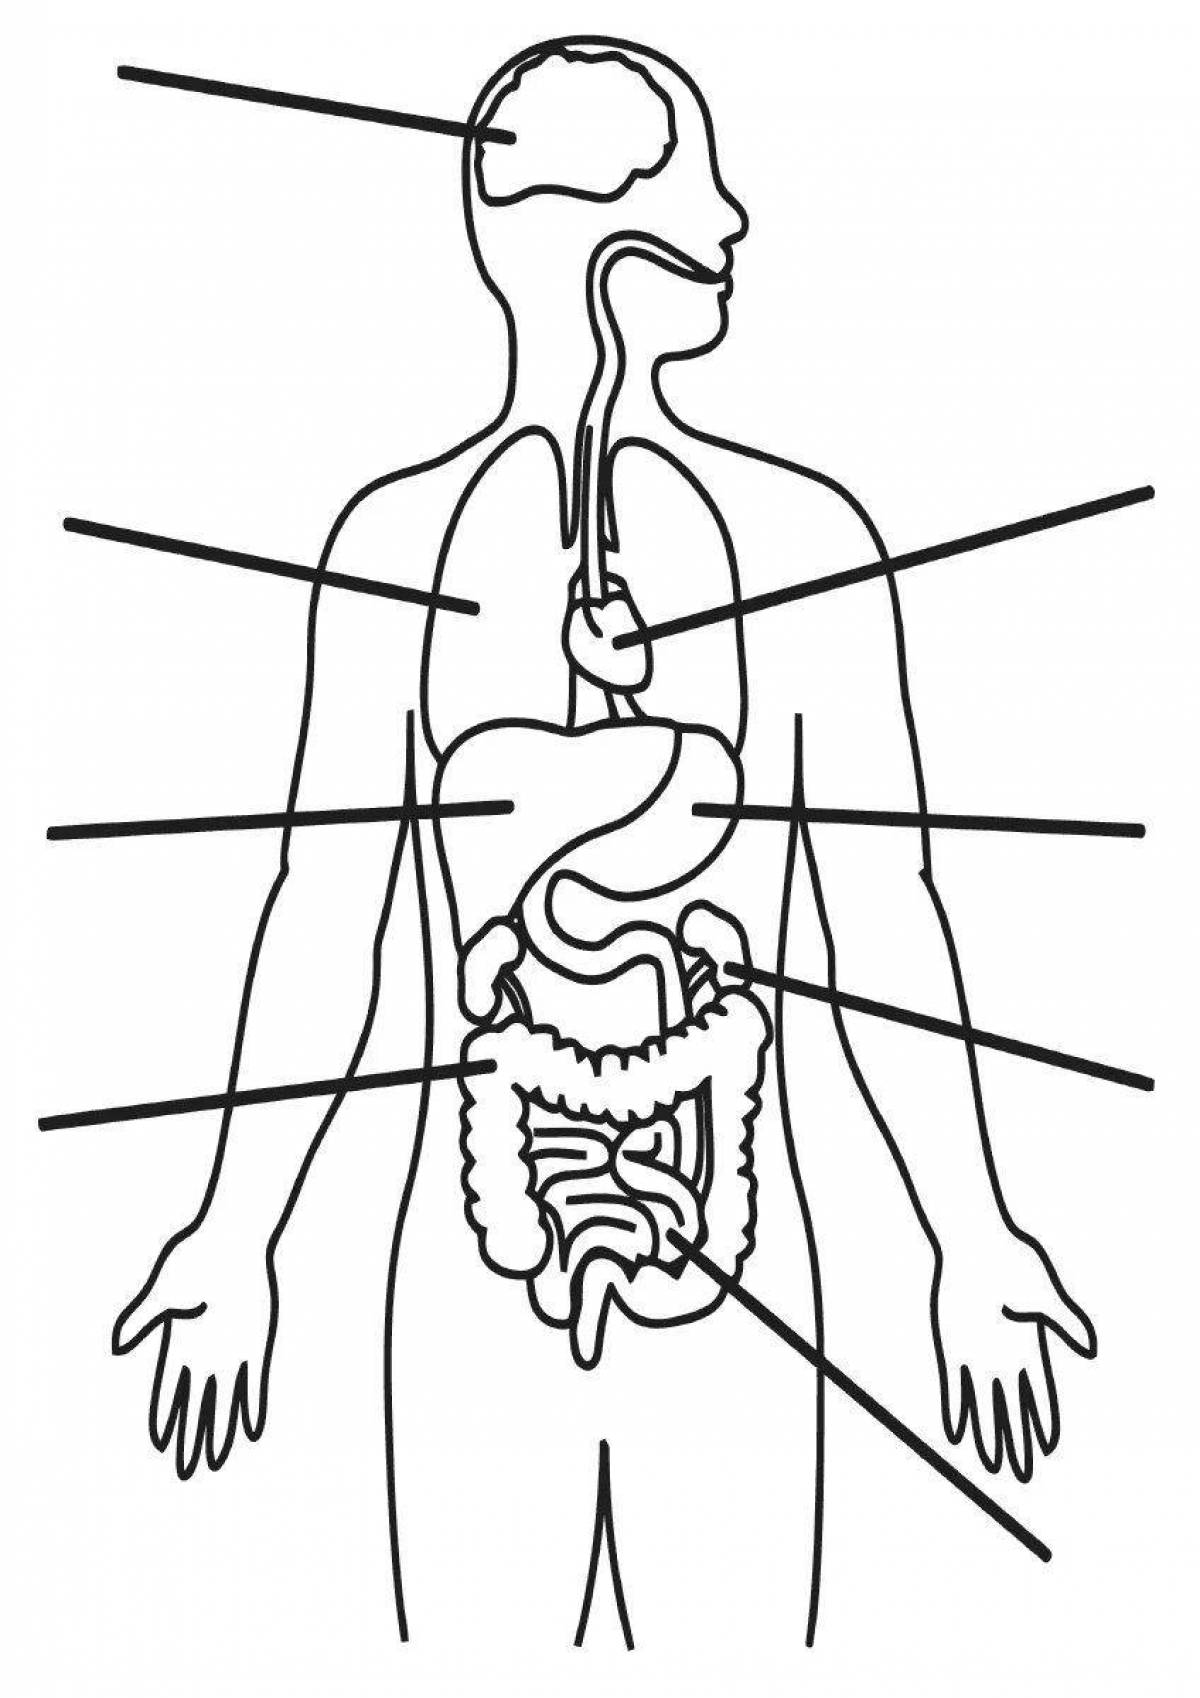 The internal structure of a person Grade 2 #20